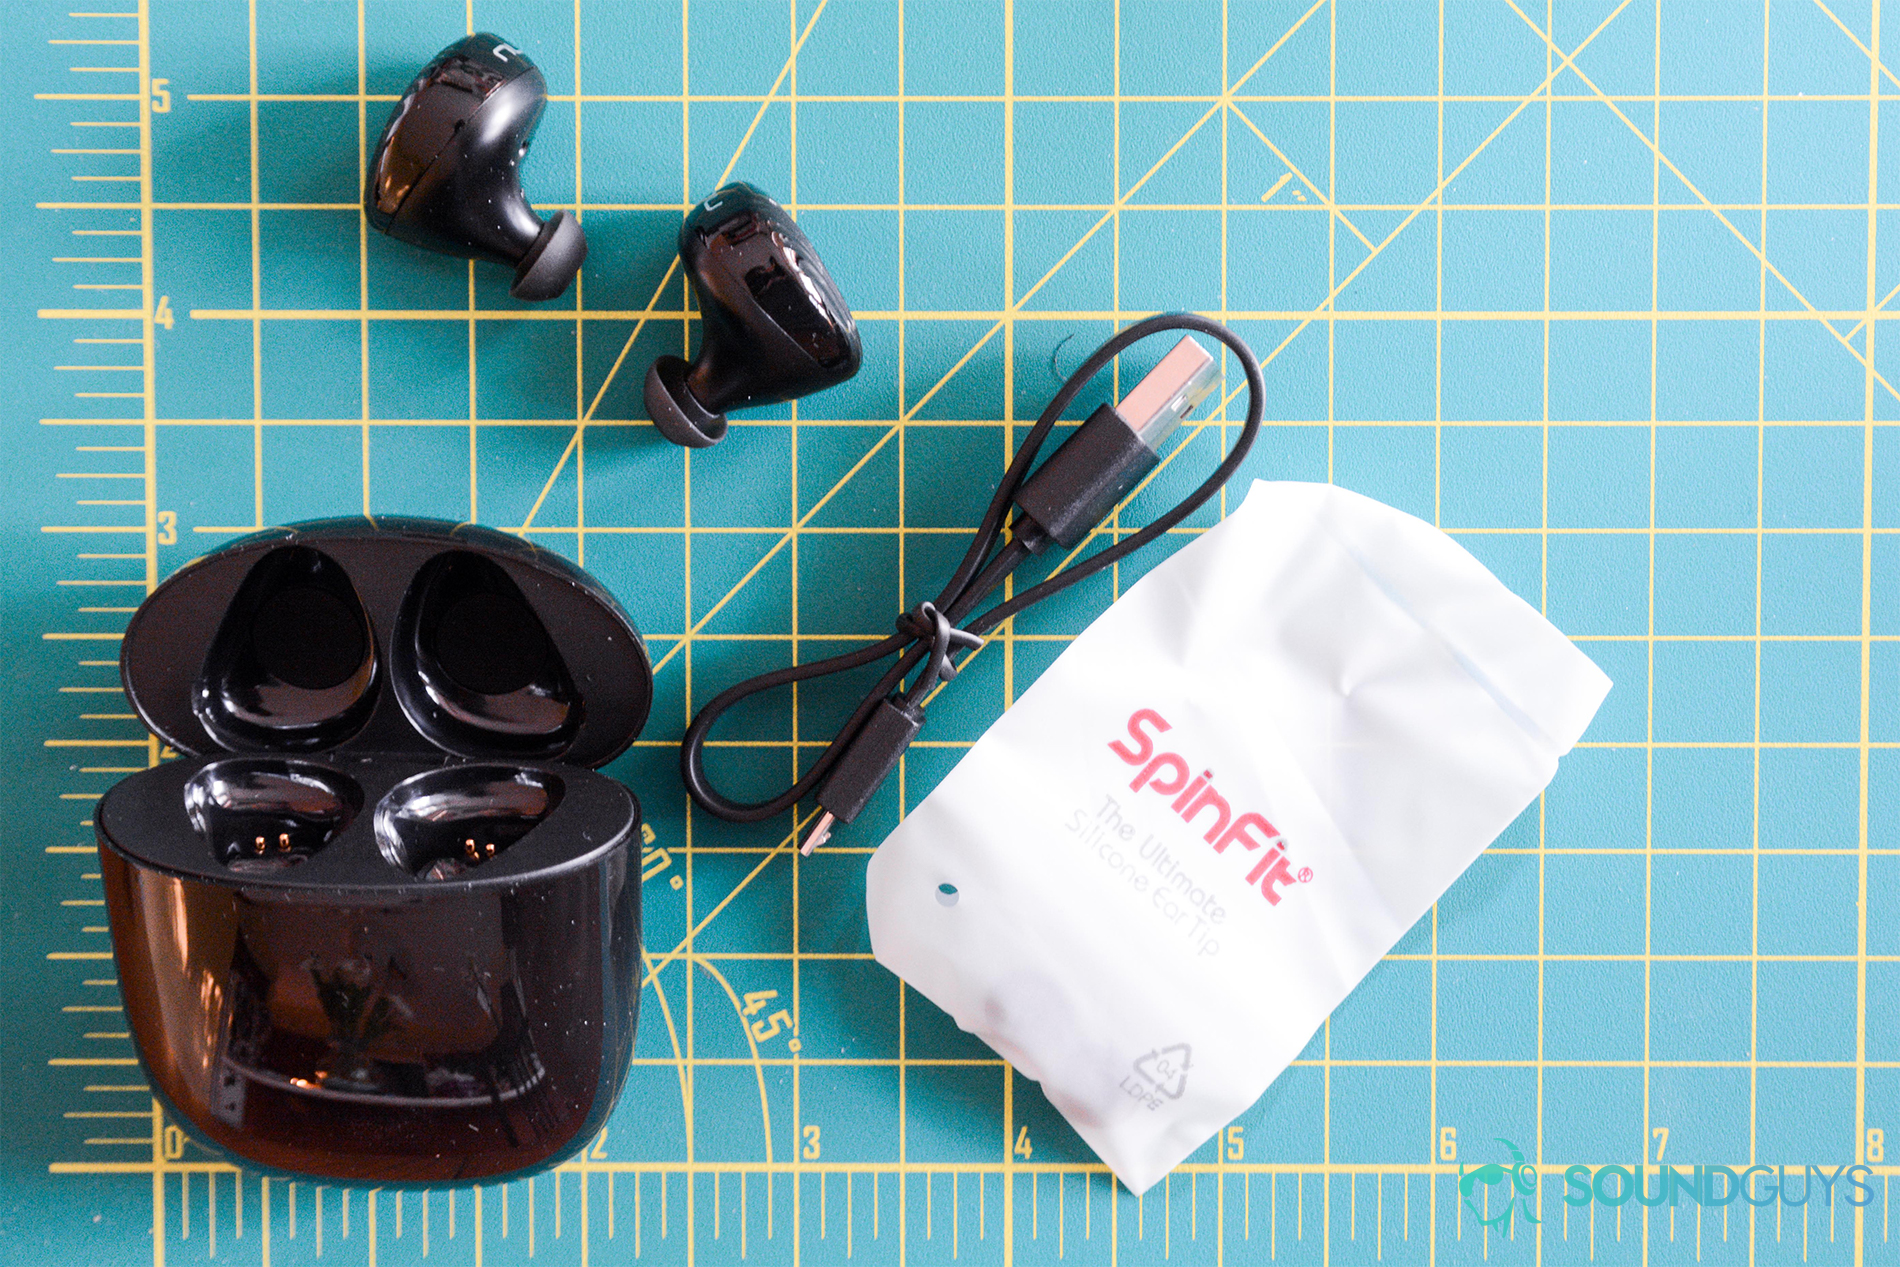 A photo showing every accessory the Optoma NuForce BE Free8 wireless earbuds come with, including the sleeves, charging case, USB cable, and earbuds.